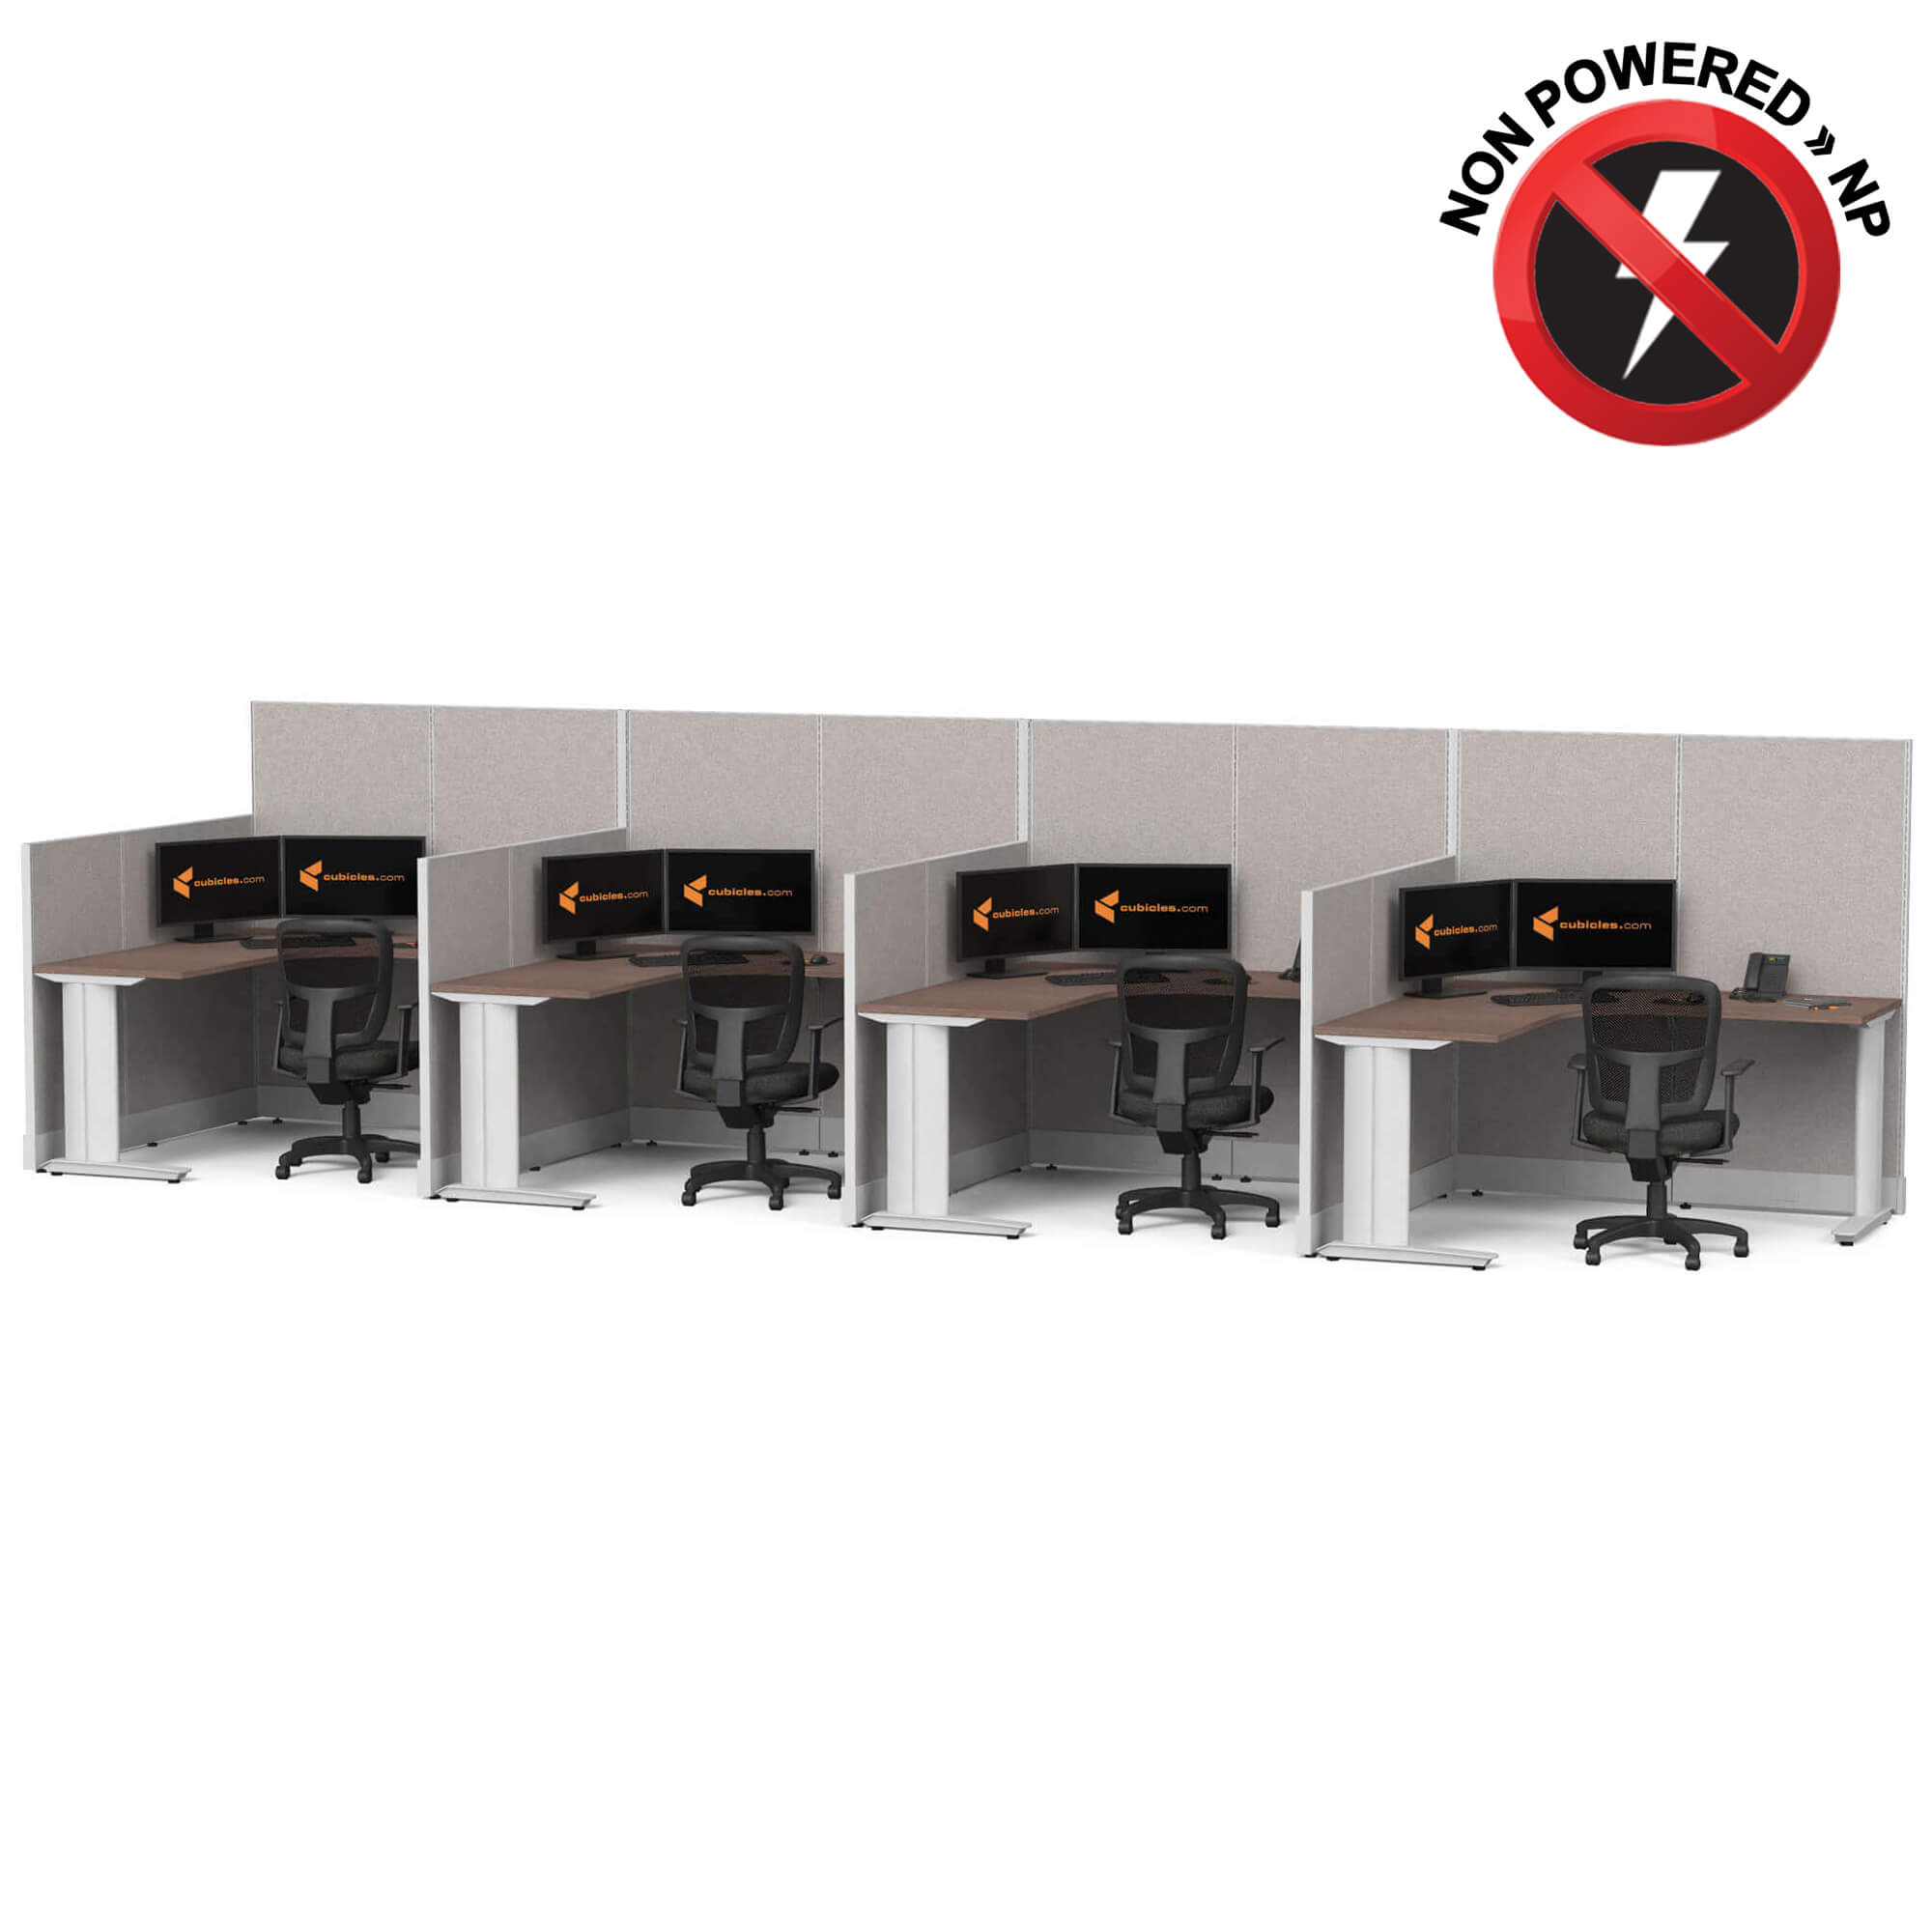 cubicle-desk-l-shaped-workstation-4pack-inline-non-powered-sign.jpg